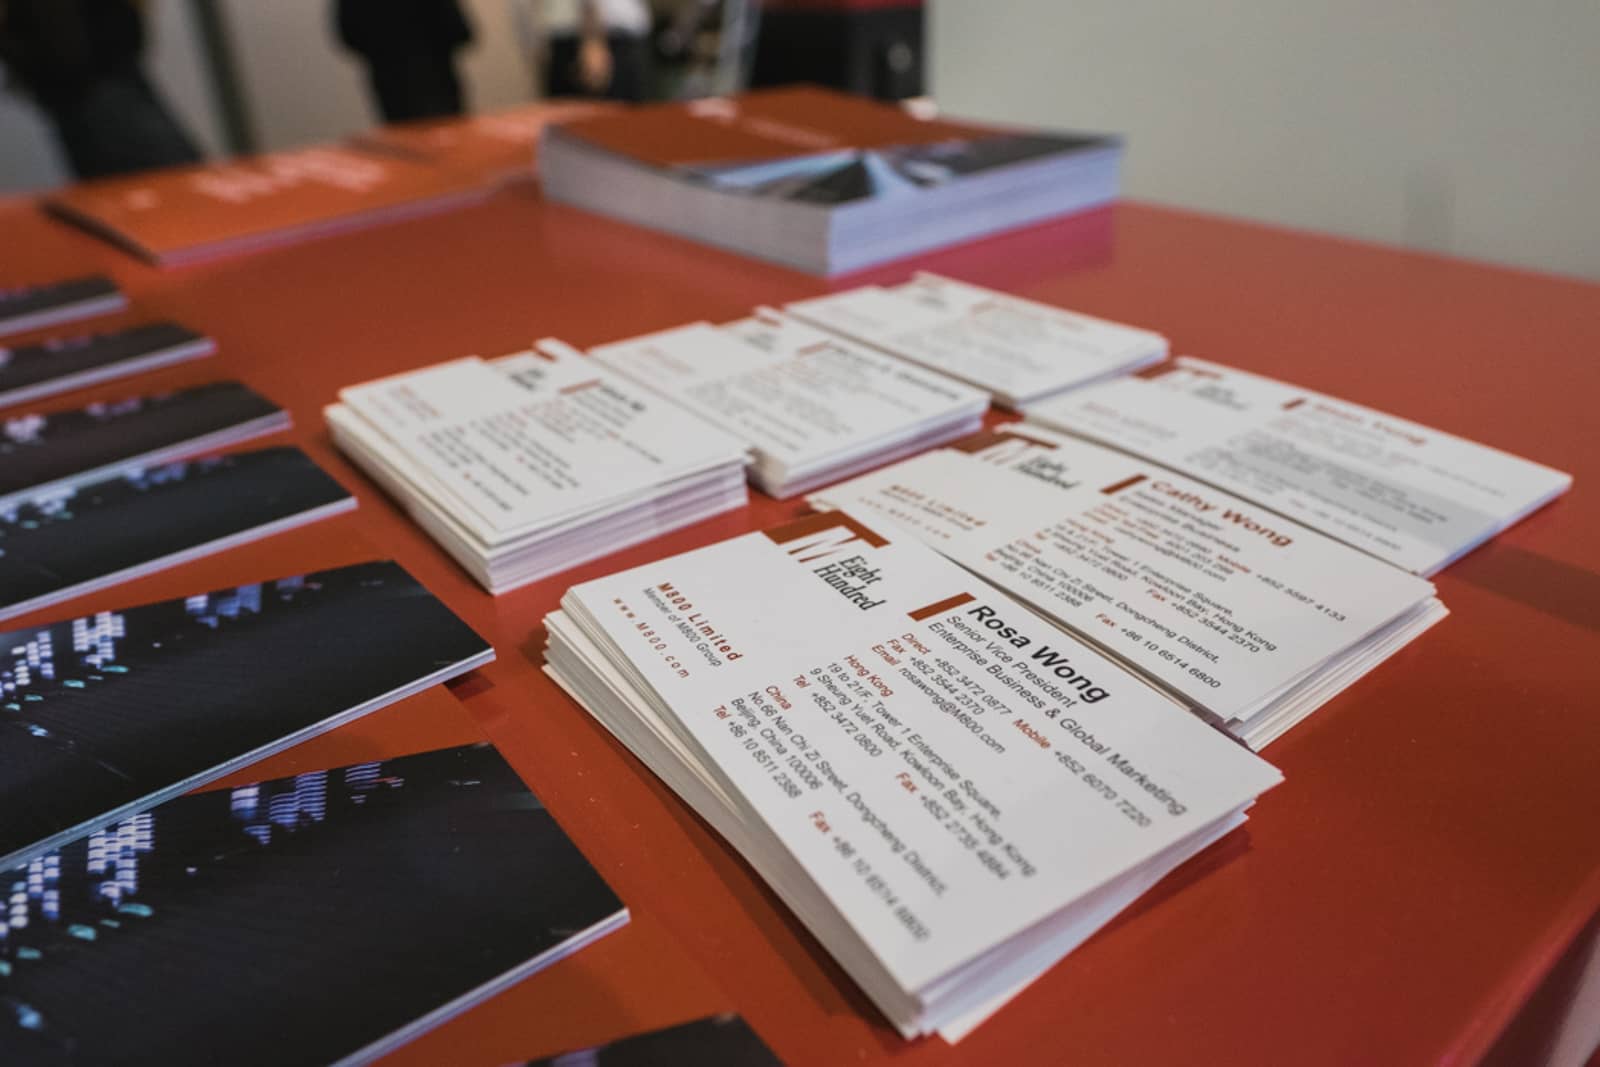 Business or networking cards on a table